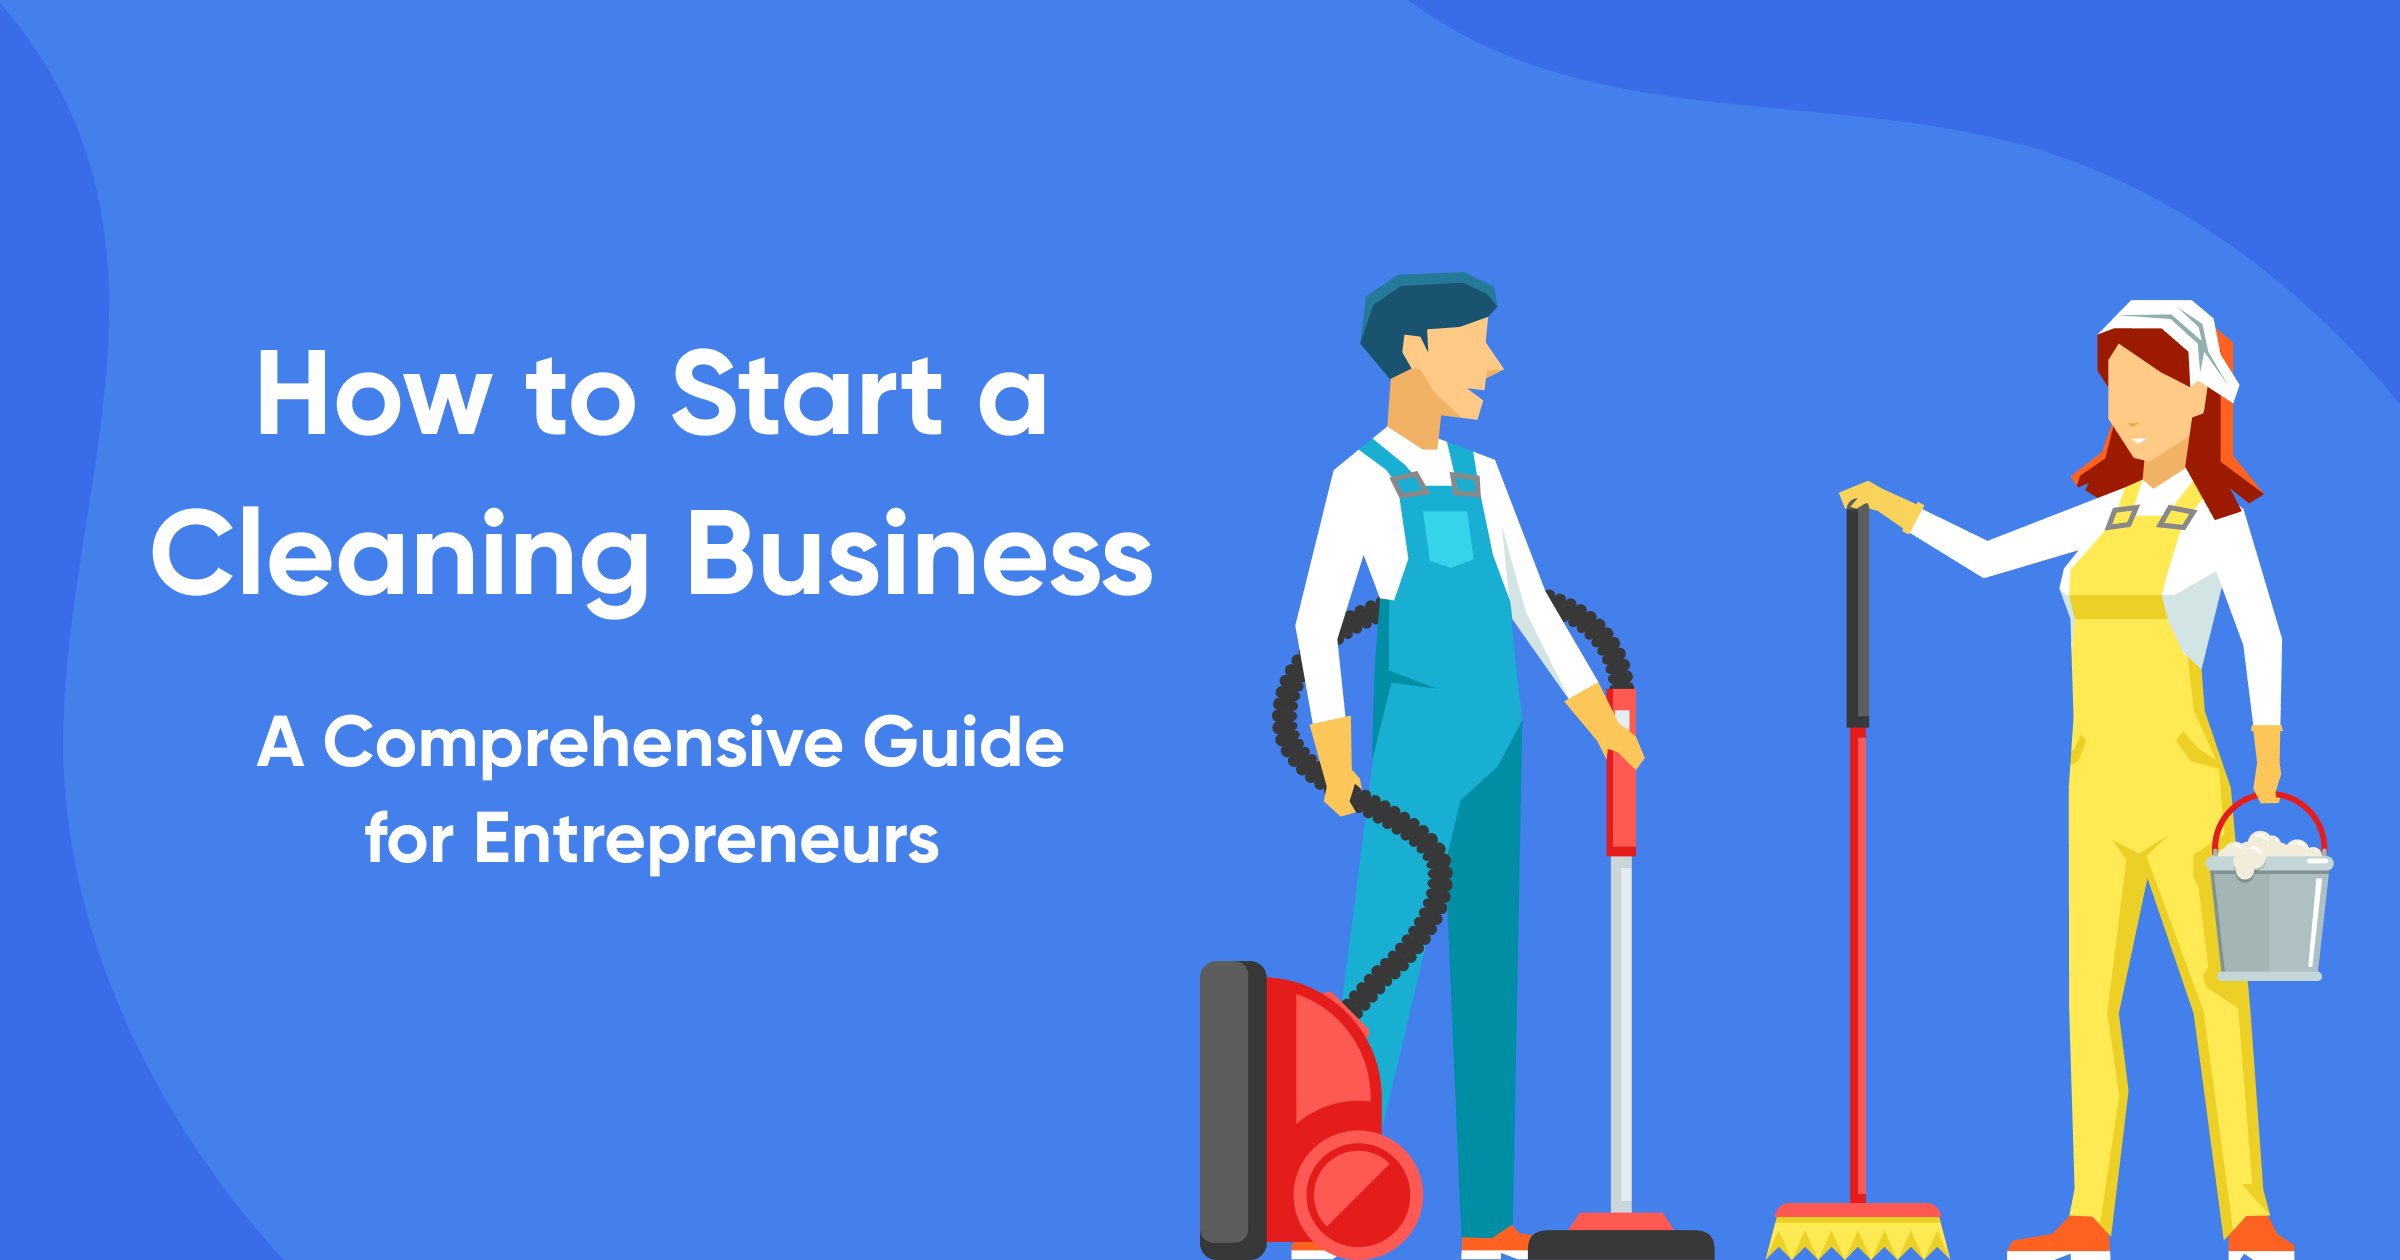 How to Start a Cleaning Business - A Comprehensive Guide for Entrepreneurs